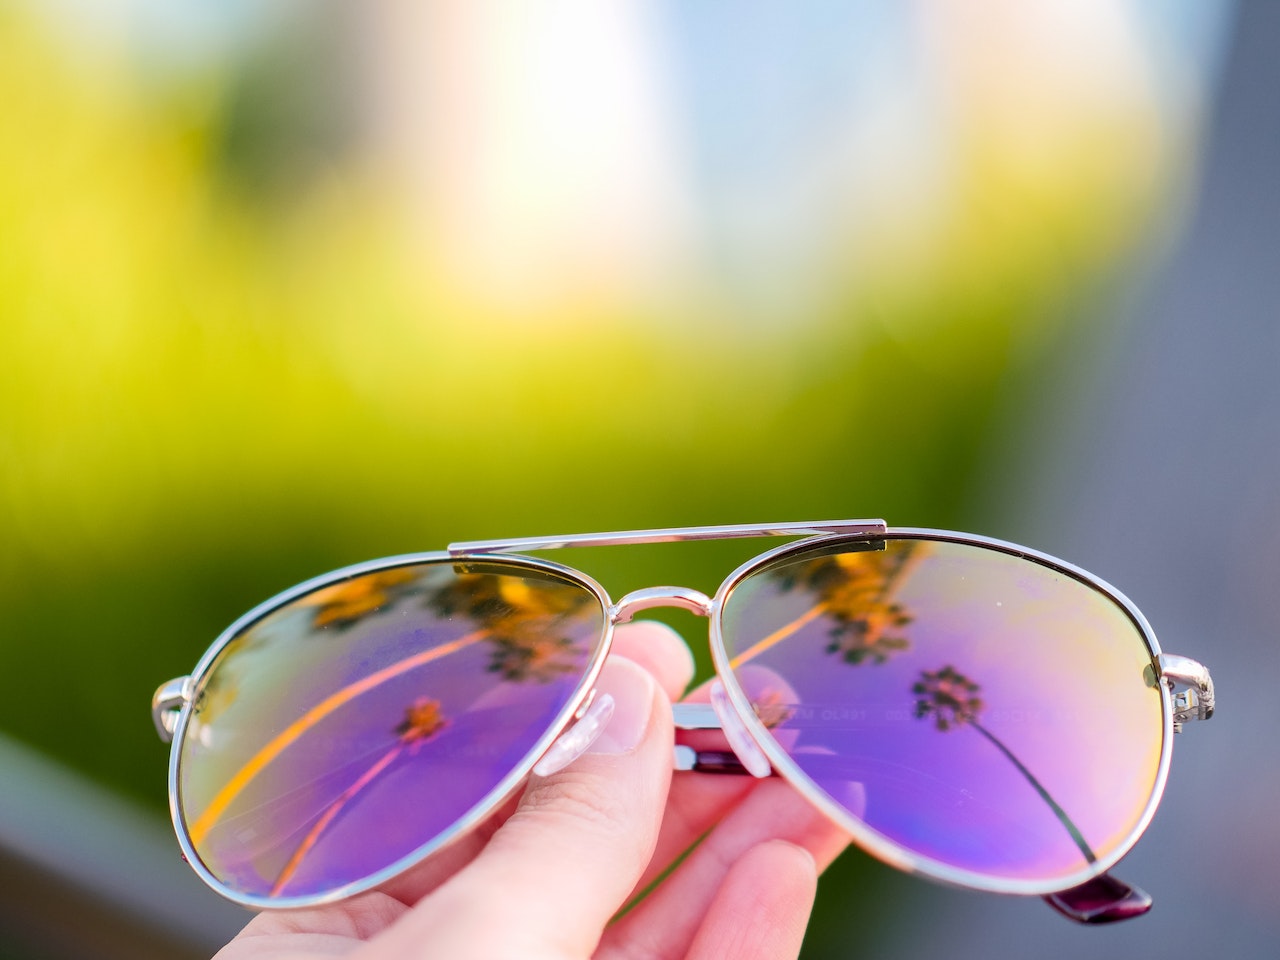 a person holding a pair of sunglasses with purple mirrored lenses.